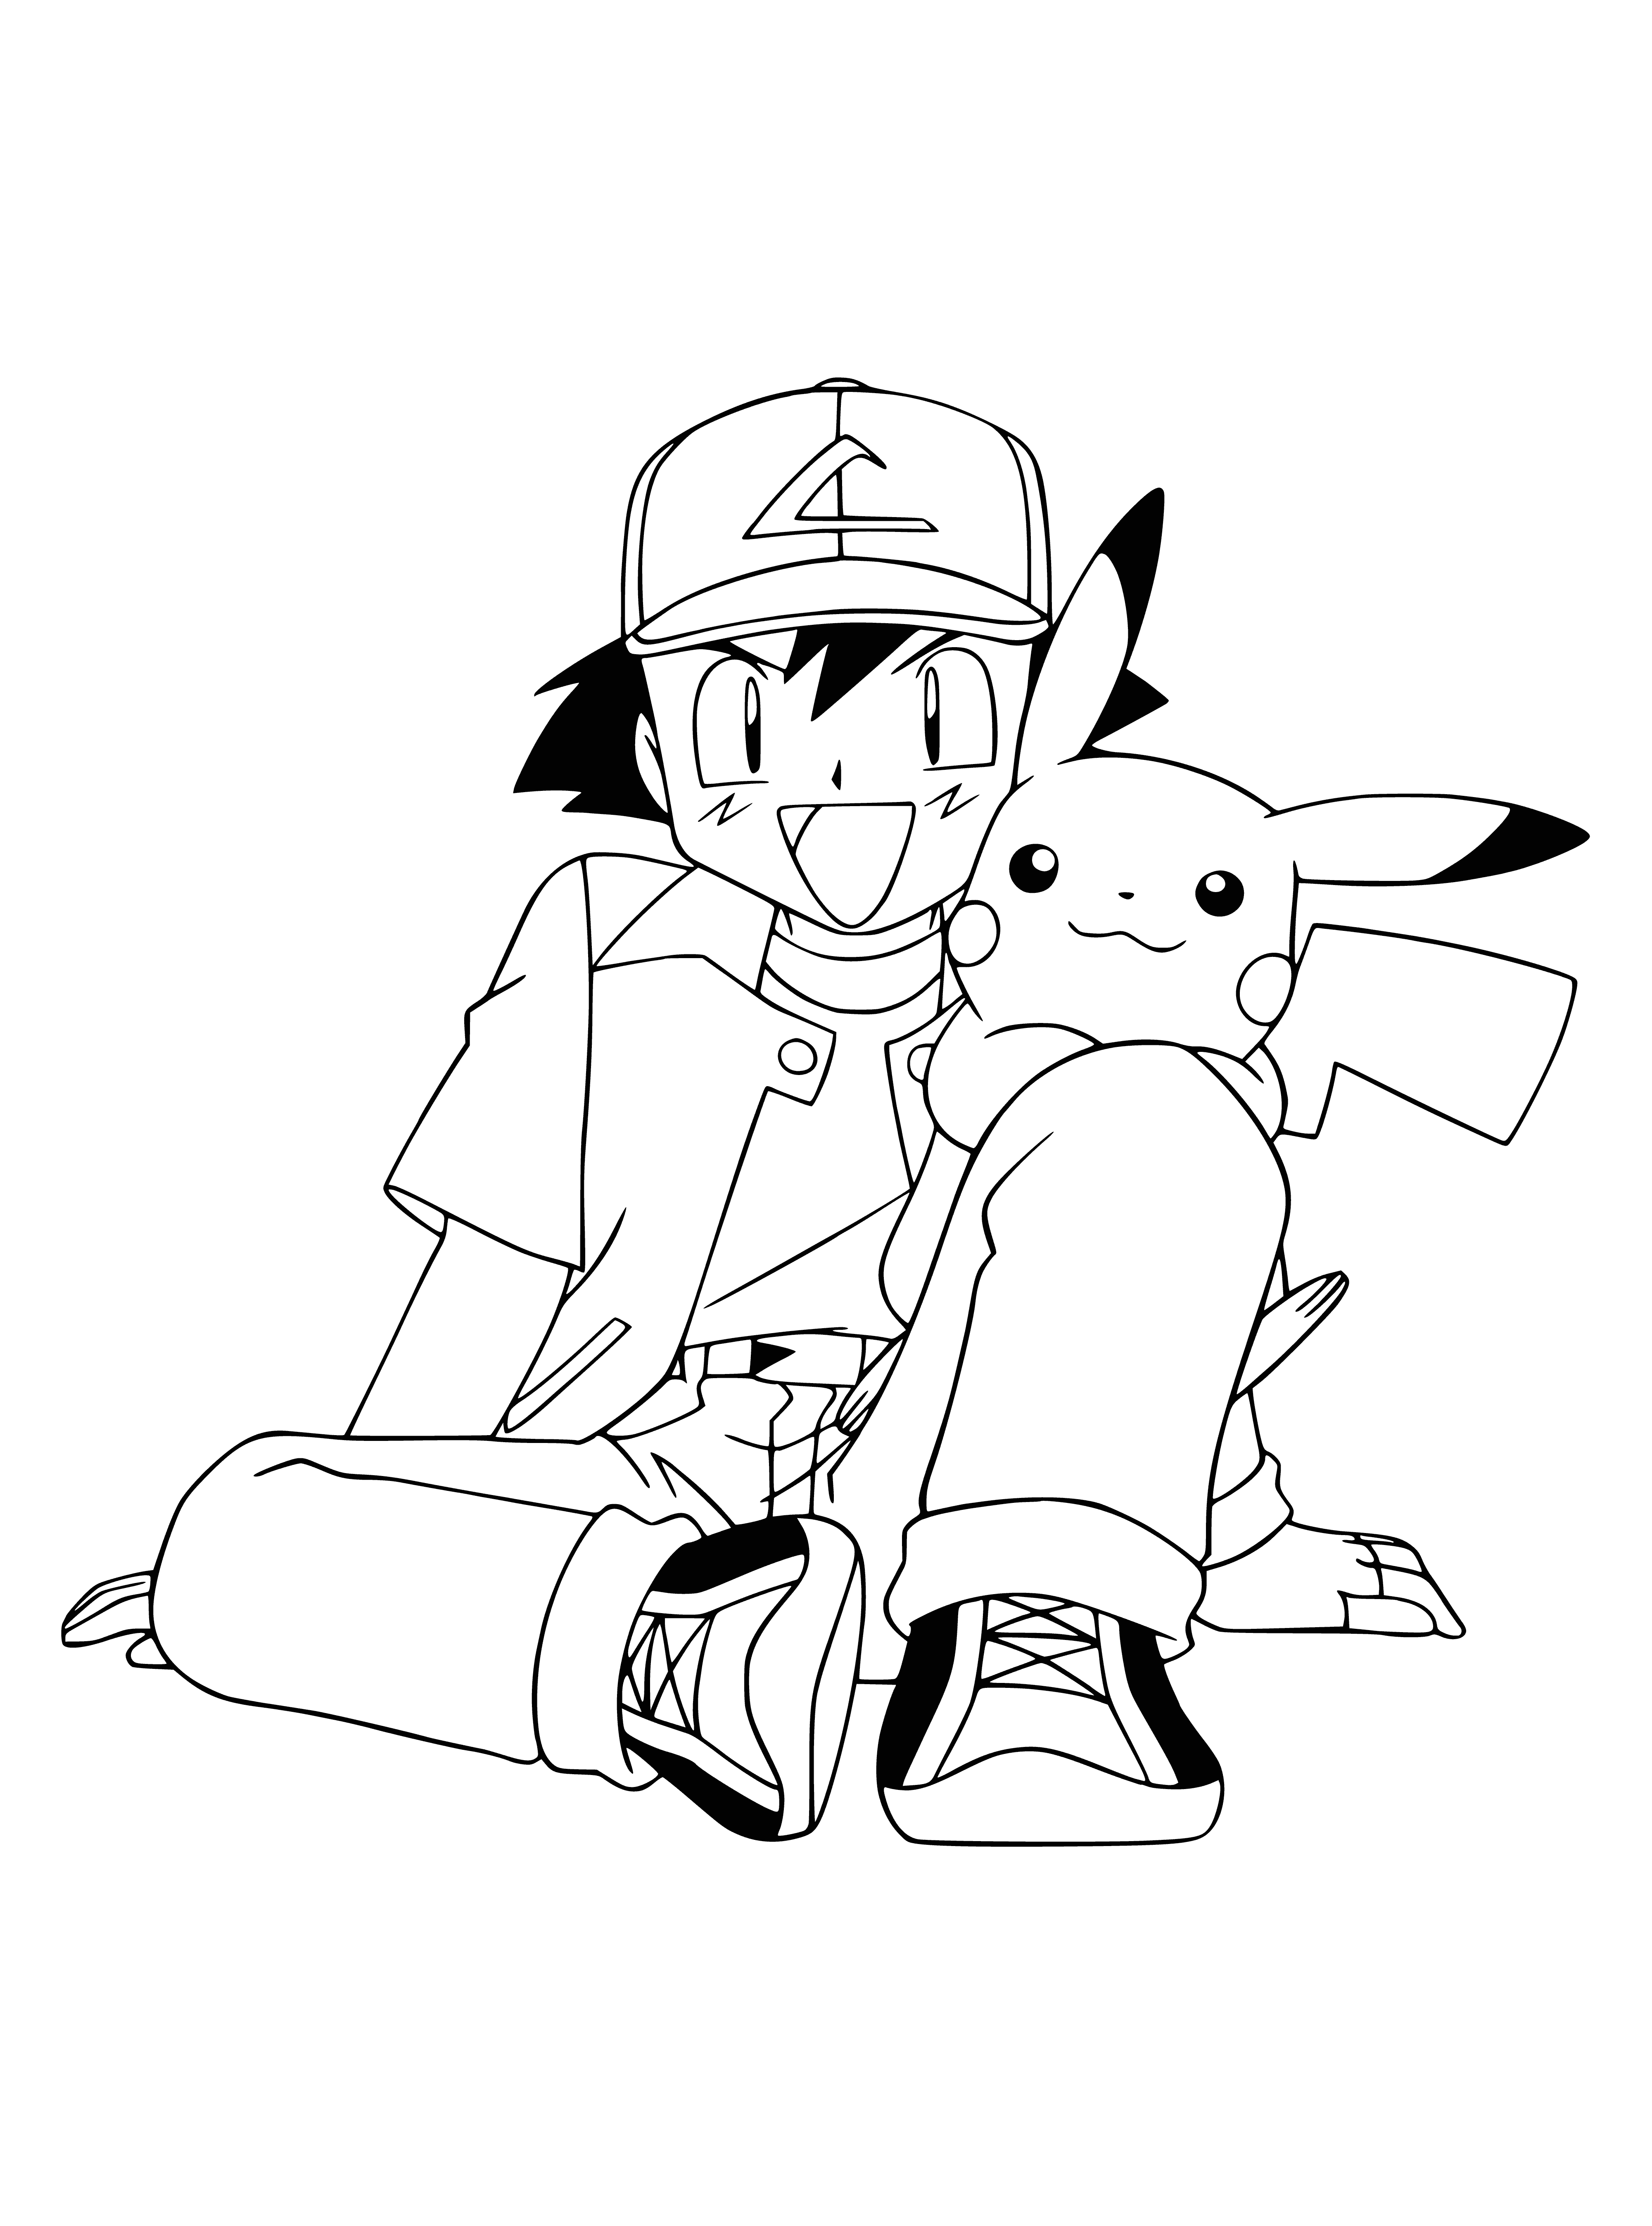 Ash and Pikachu coloring page